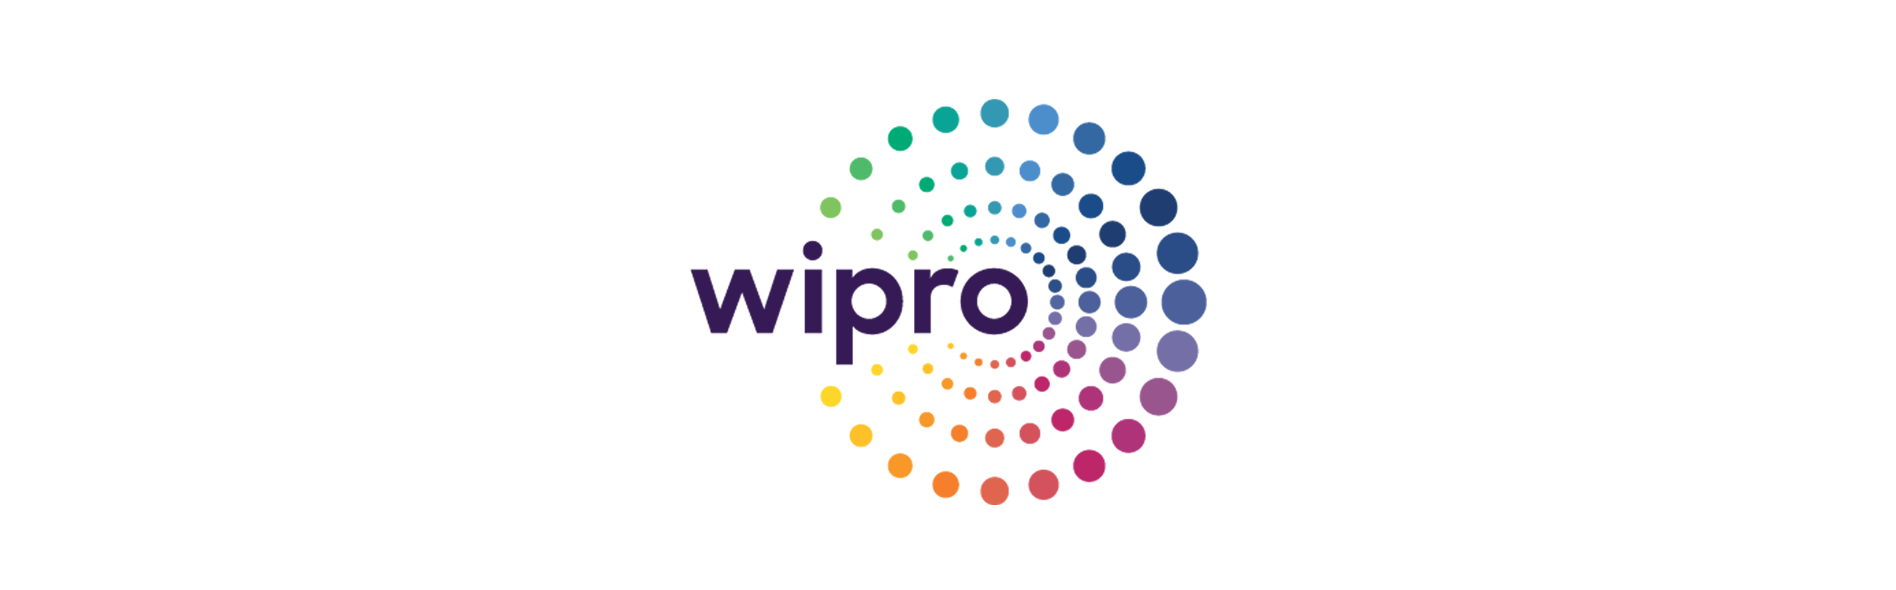 Wipro Partners with Kibo Commerce to Deliver Digitalization Solutions